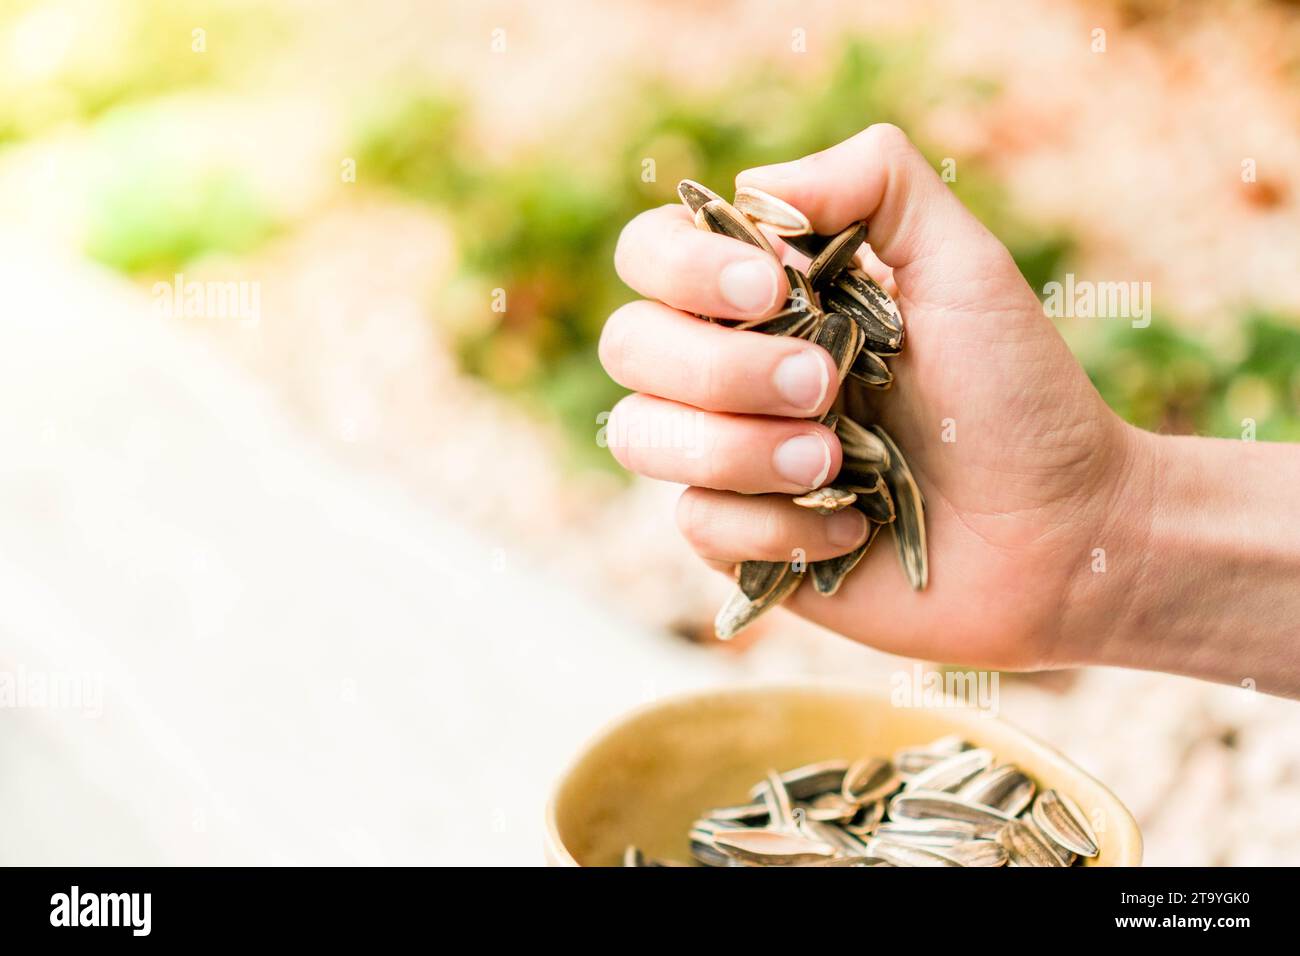 Closeup view of unrecognizable white woman hands taking plenty healthy seed as snack in a celebration Stock Photo